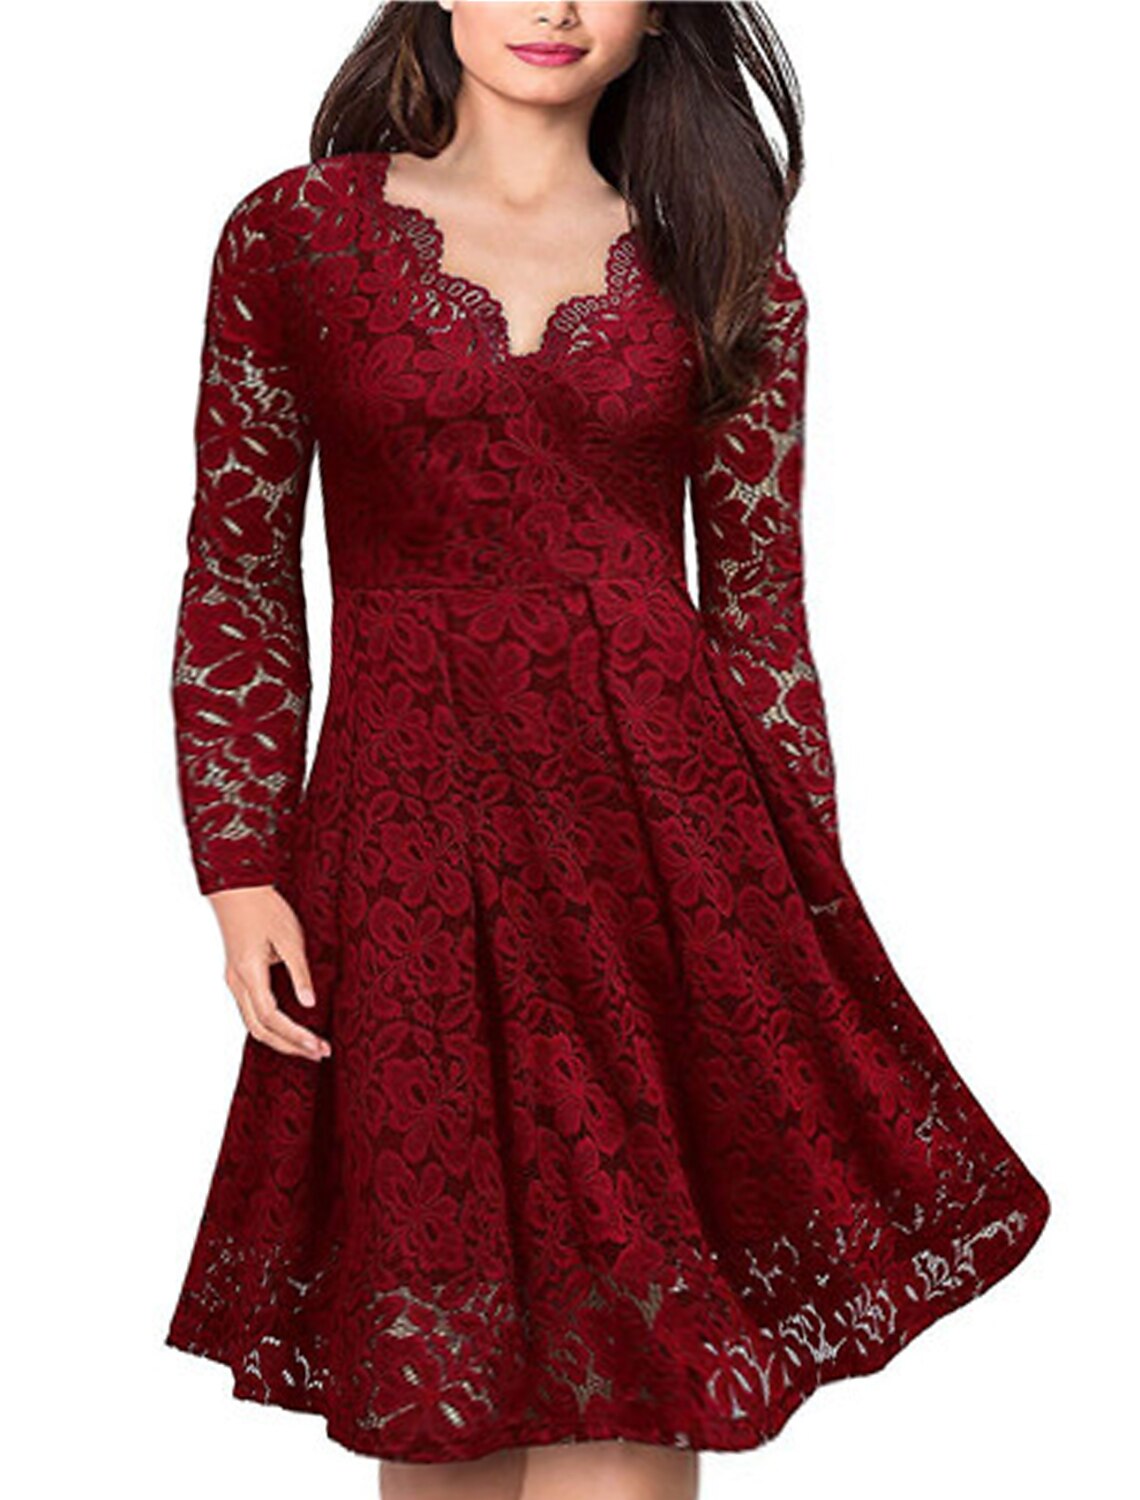 Women's A-Line Lace Cocktail Dress with Bell Sleeve for Any Event! 